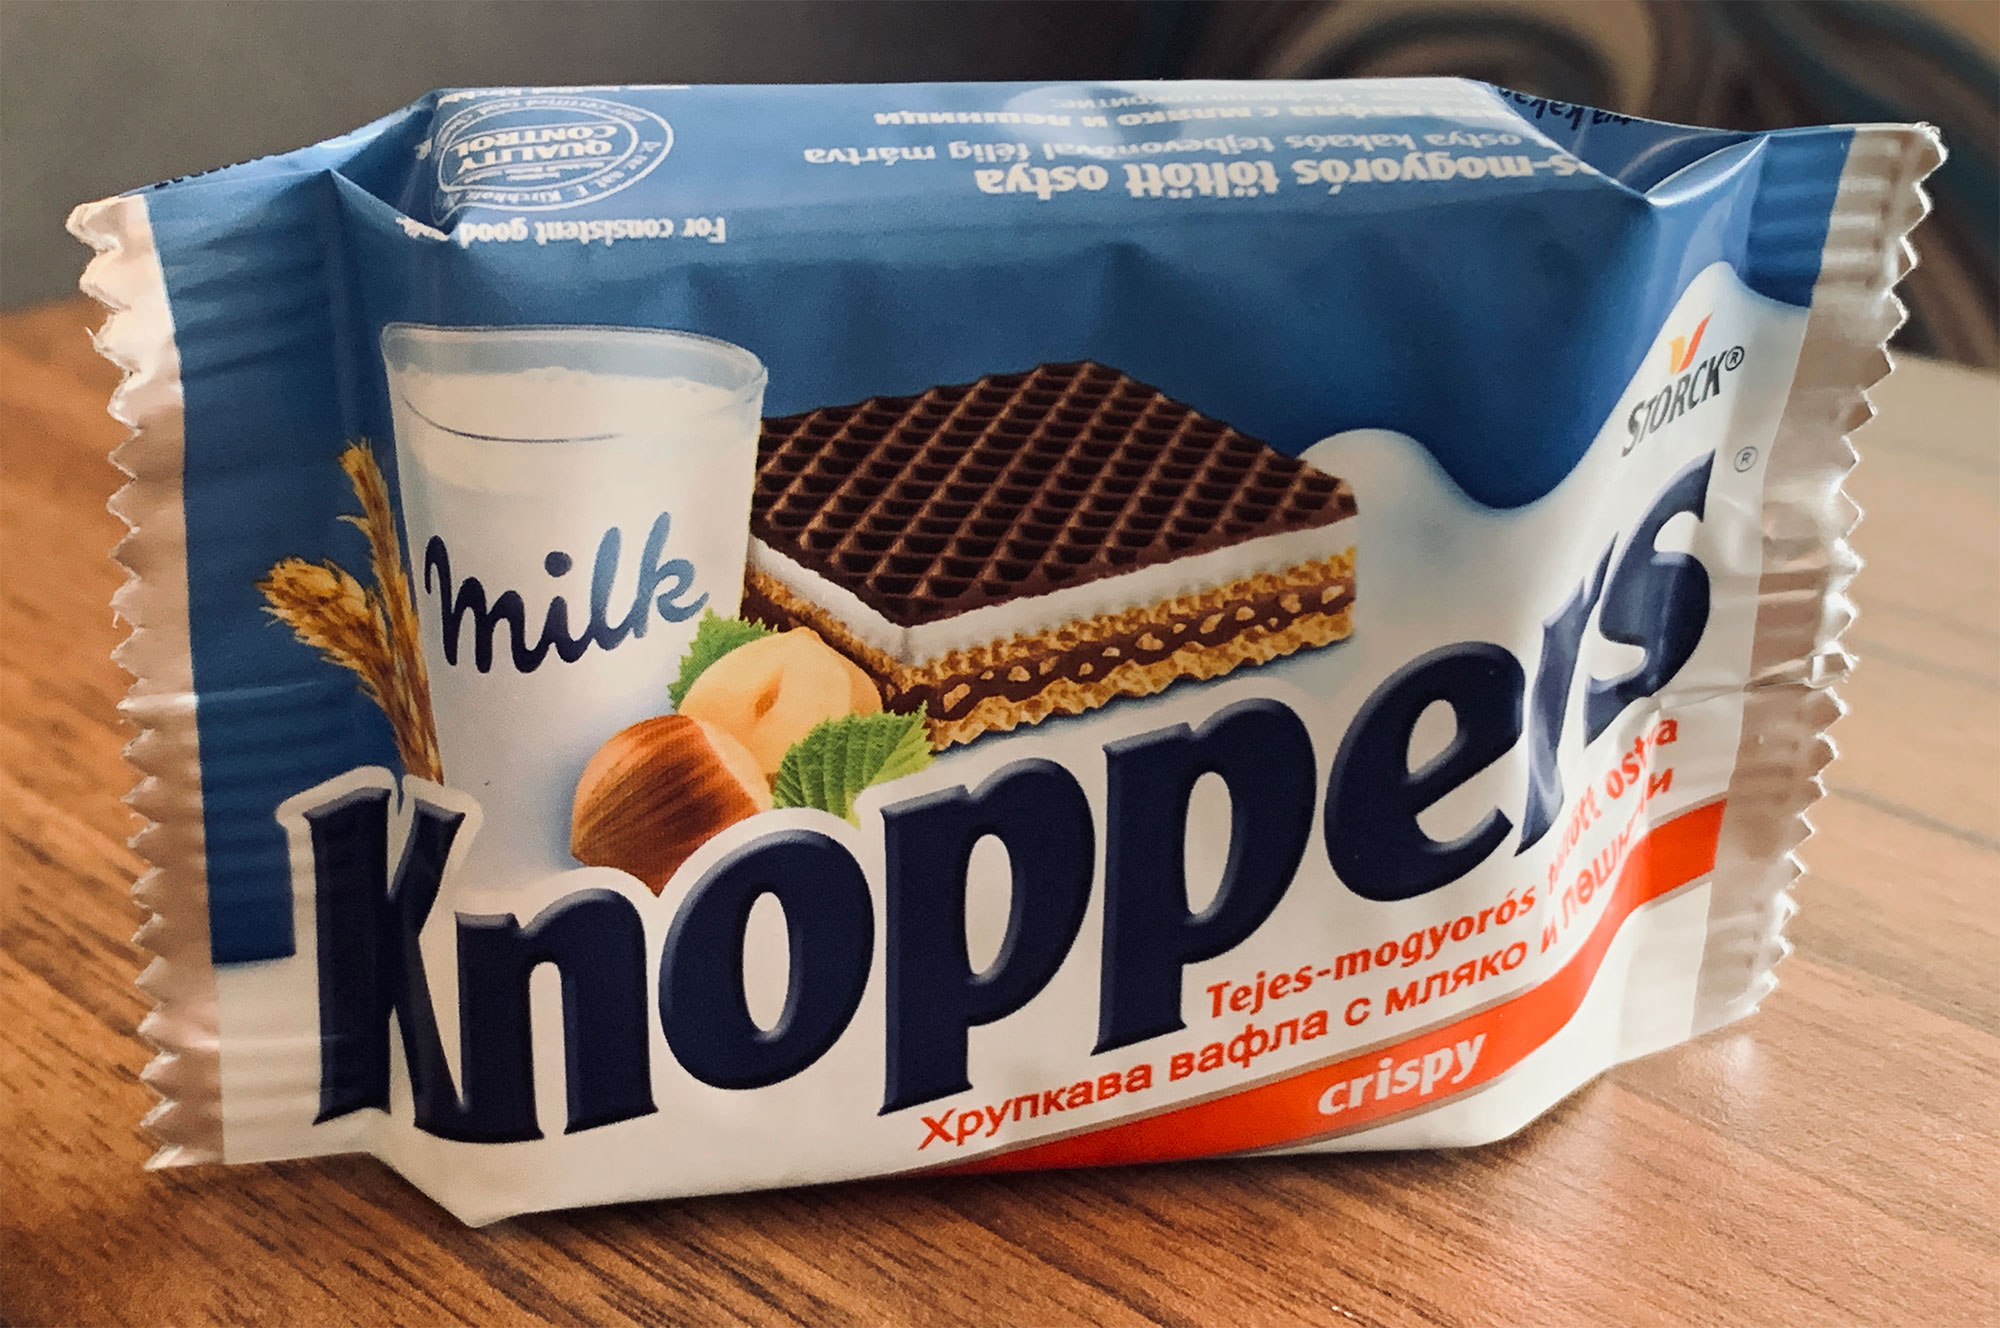 Knoppers2000